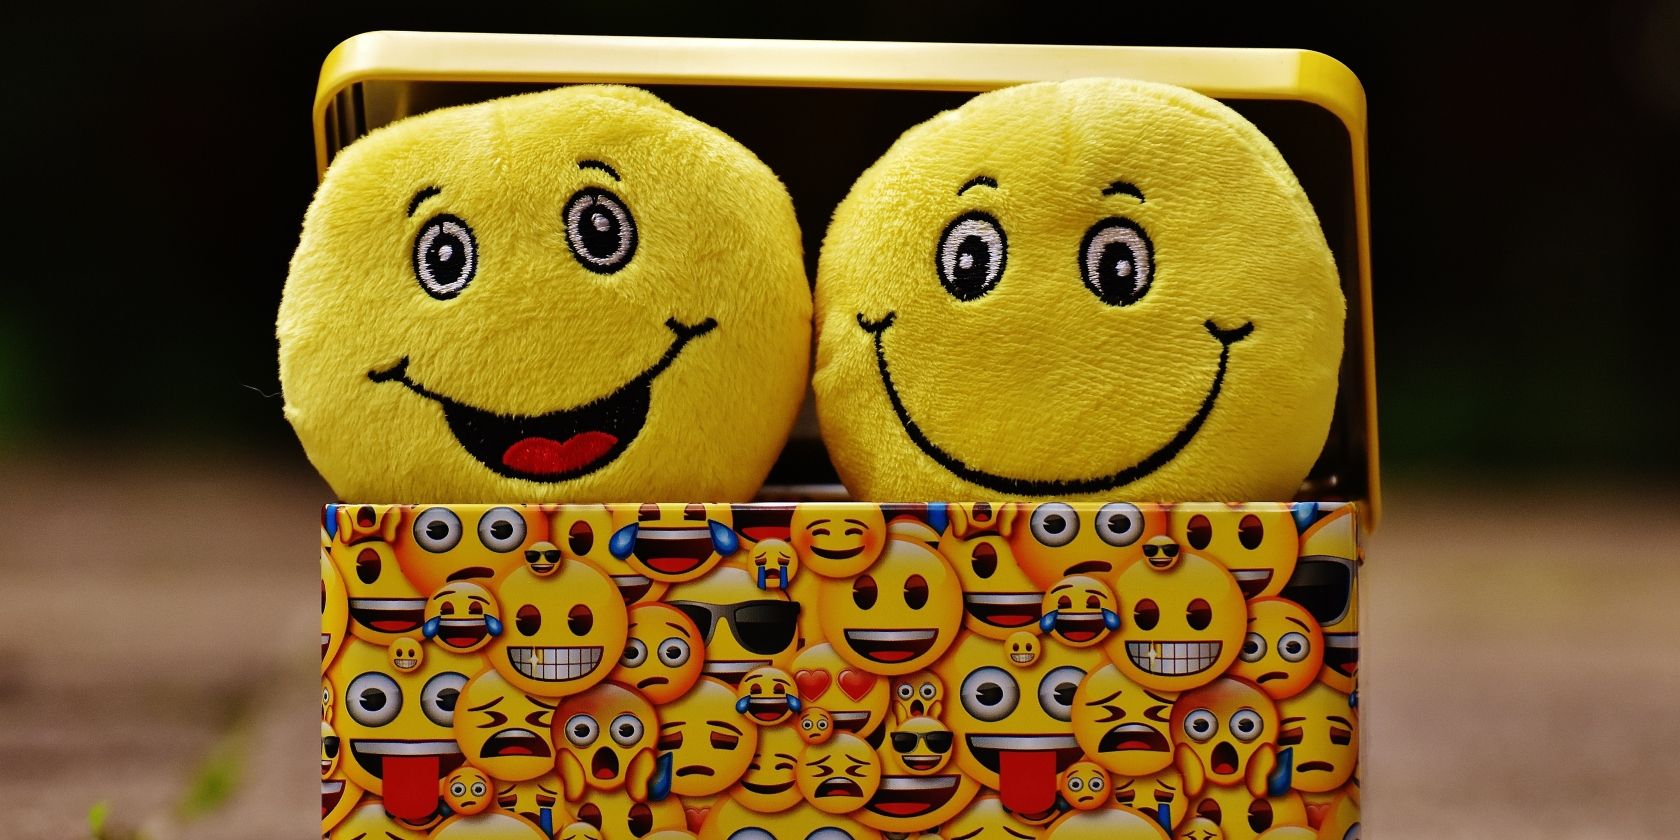 Two yellow smiley emojis in a yellow box